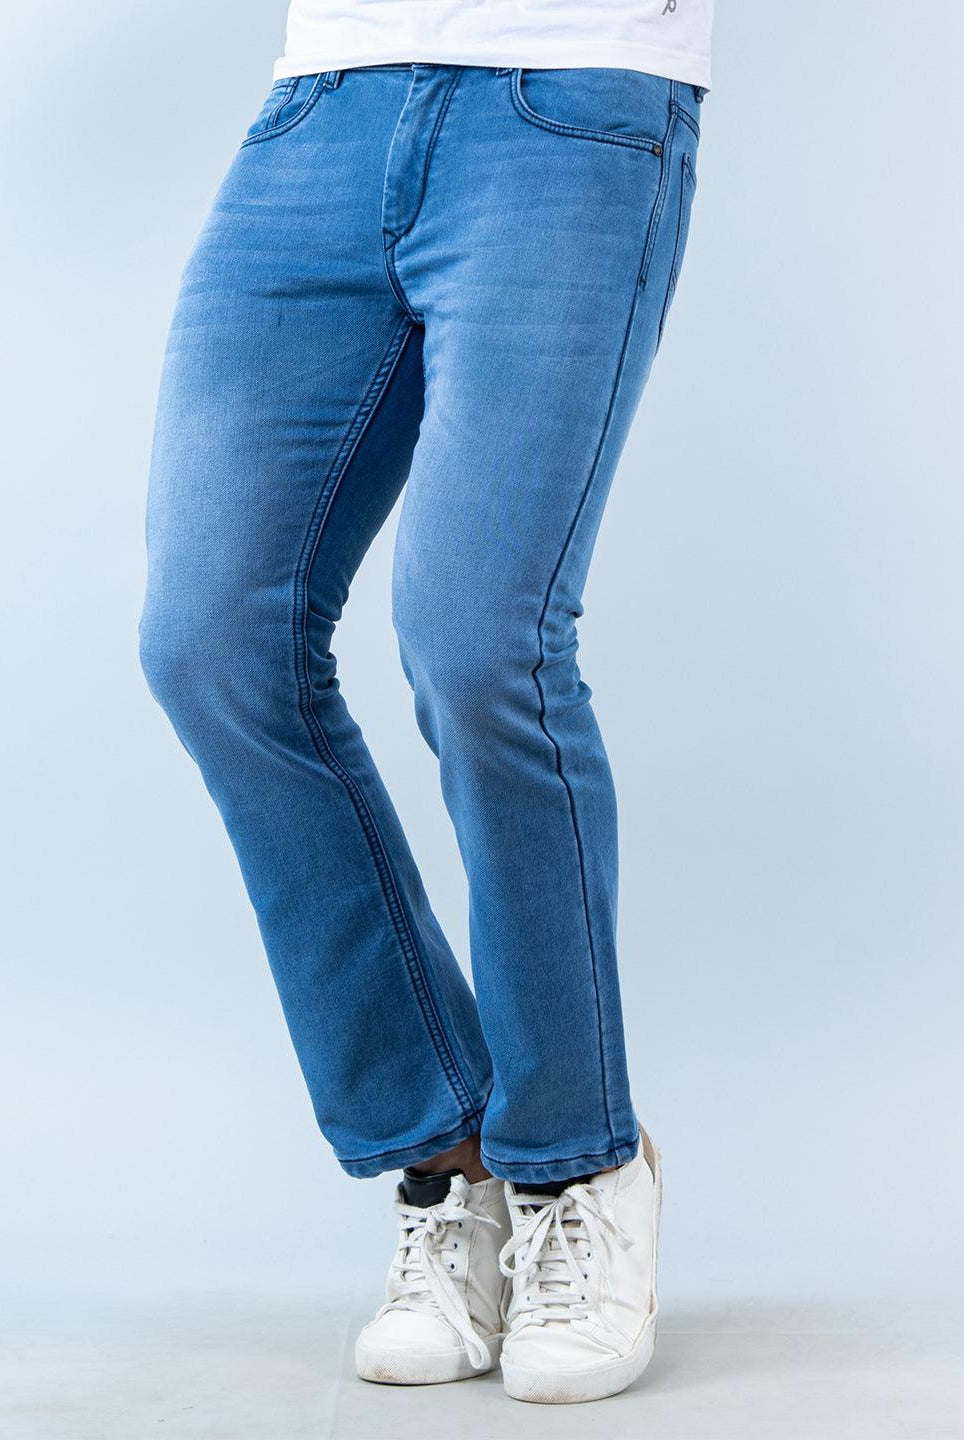 light blue boot cut stretchable mens jeans